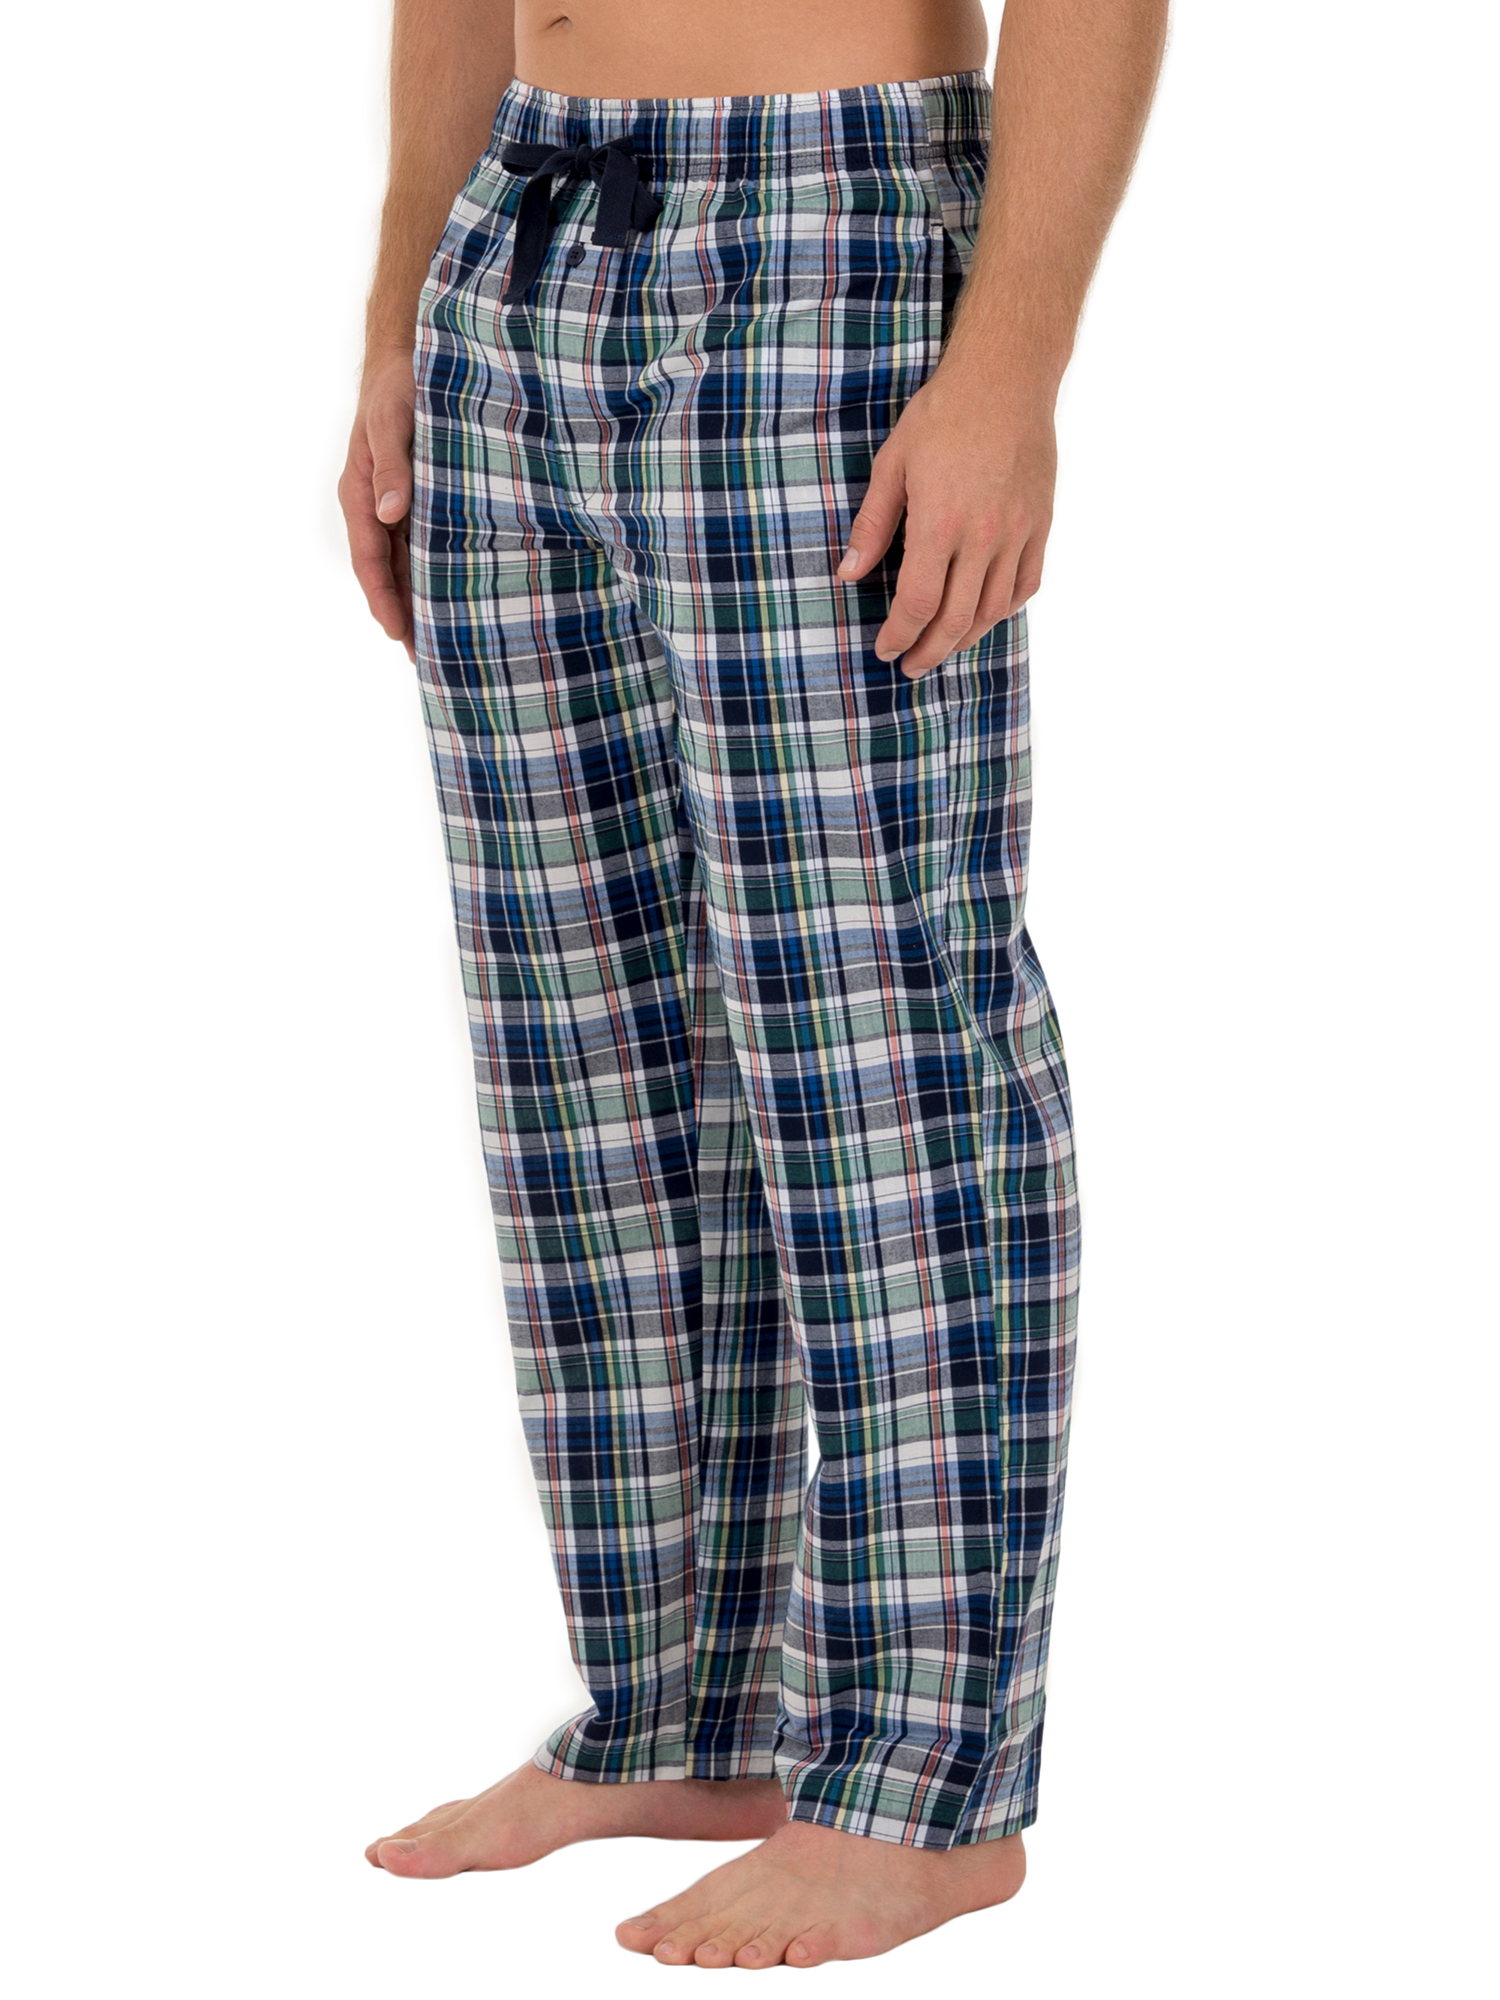 Fruit of the Loom Men's and Big Men's Microsanded Woven Plaid Pajama Pants, Sizes S-6XL & LT-3XLT - image 3 of 5